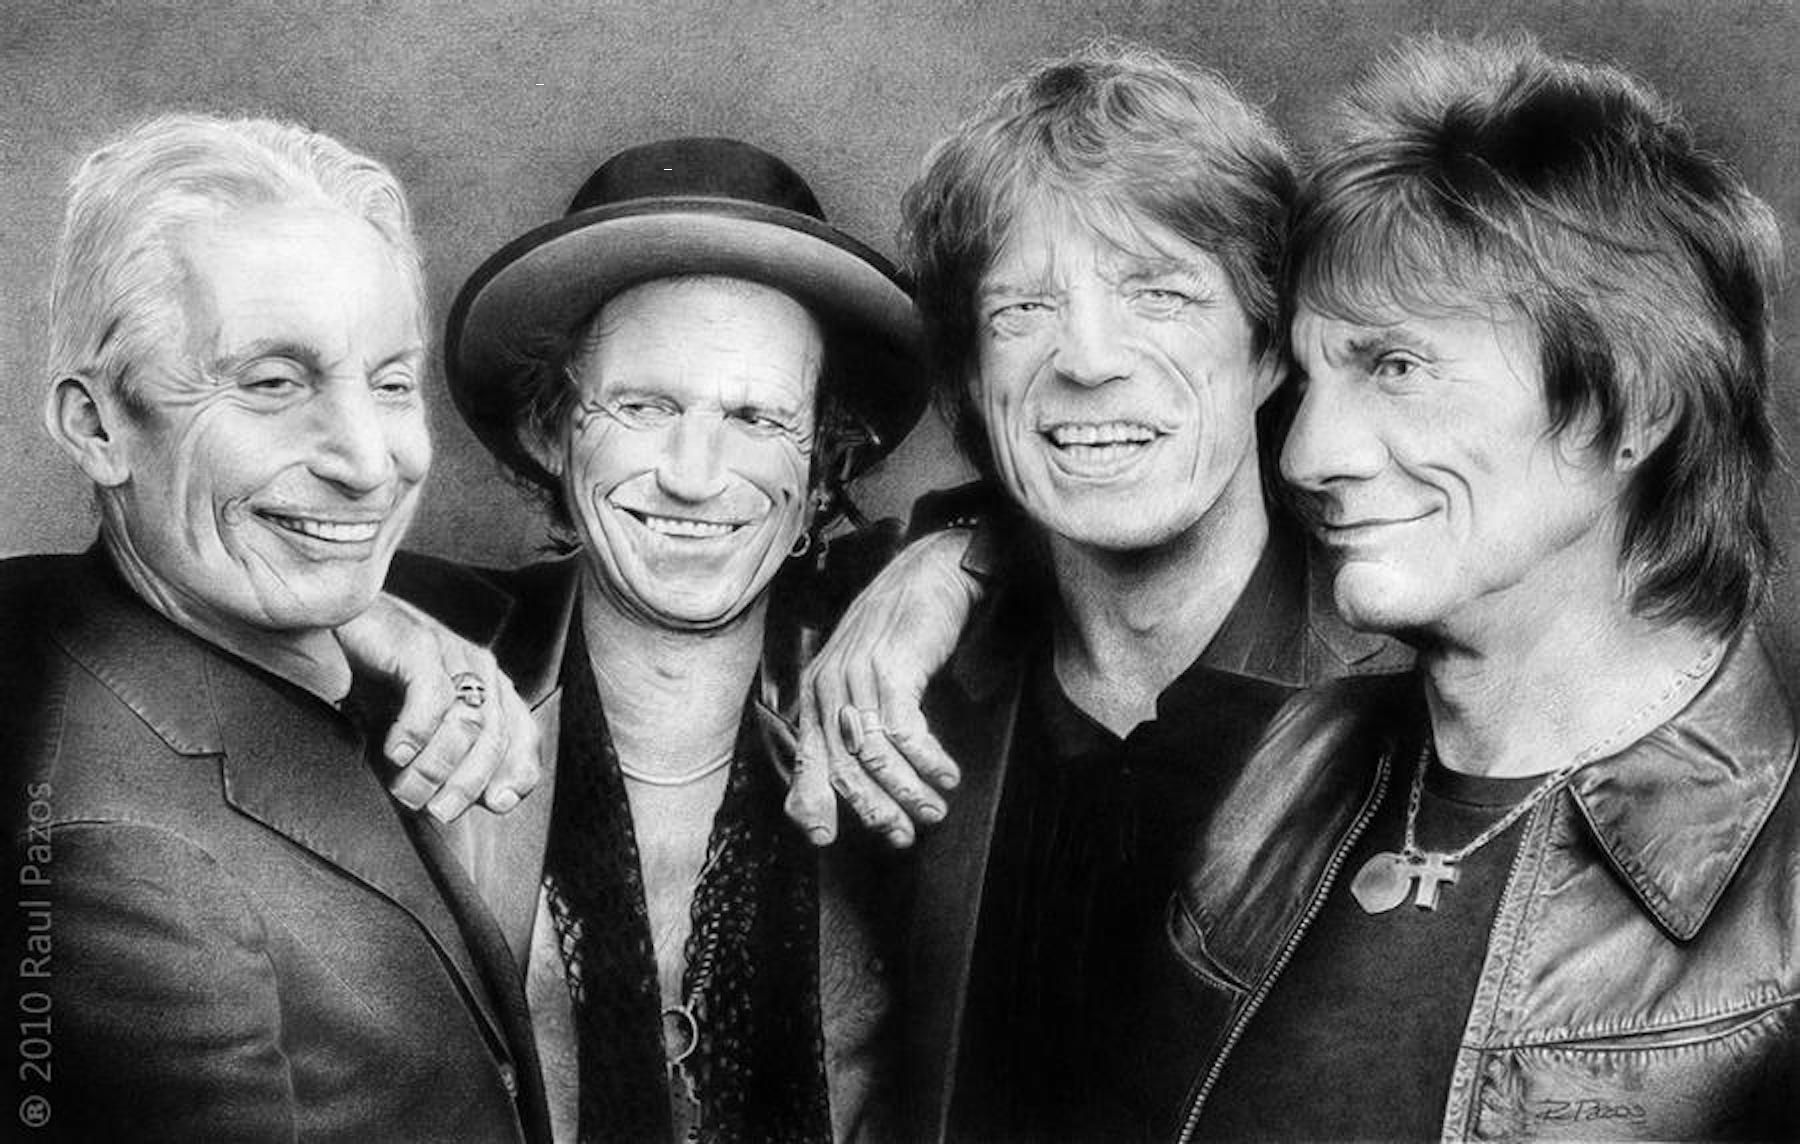 Pencil style drawing of Rolling Stones rock and roll members Charlie Watts, Keith Richards, Mick Jagger, Ronnie Woods